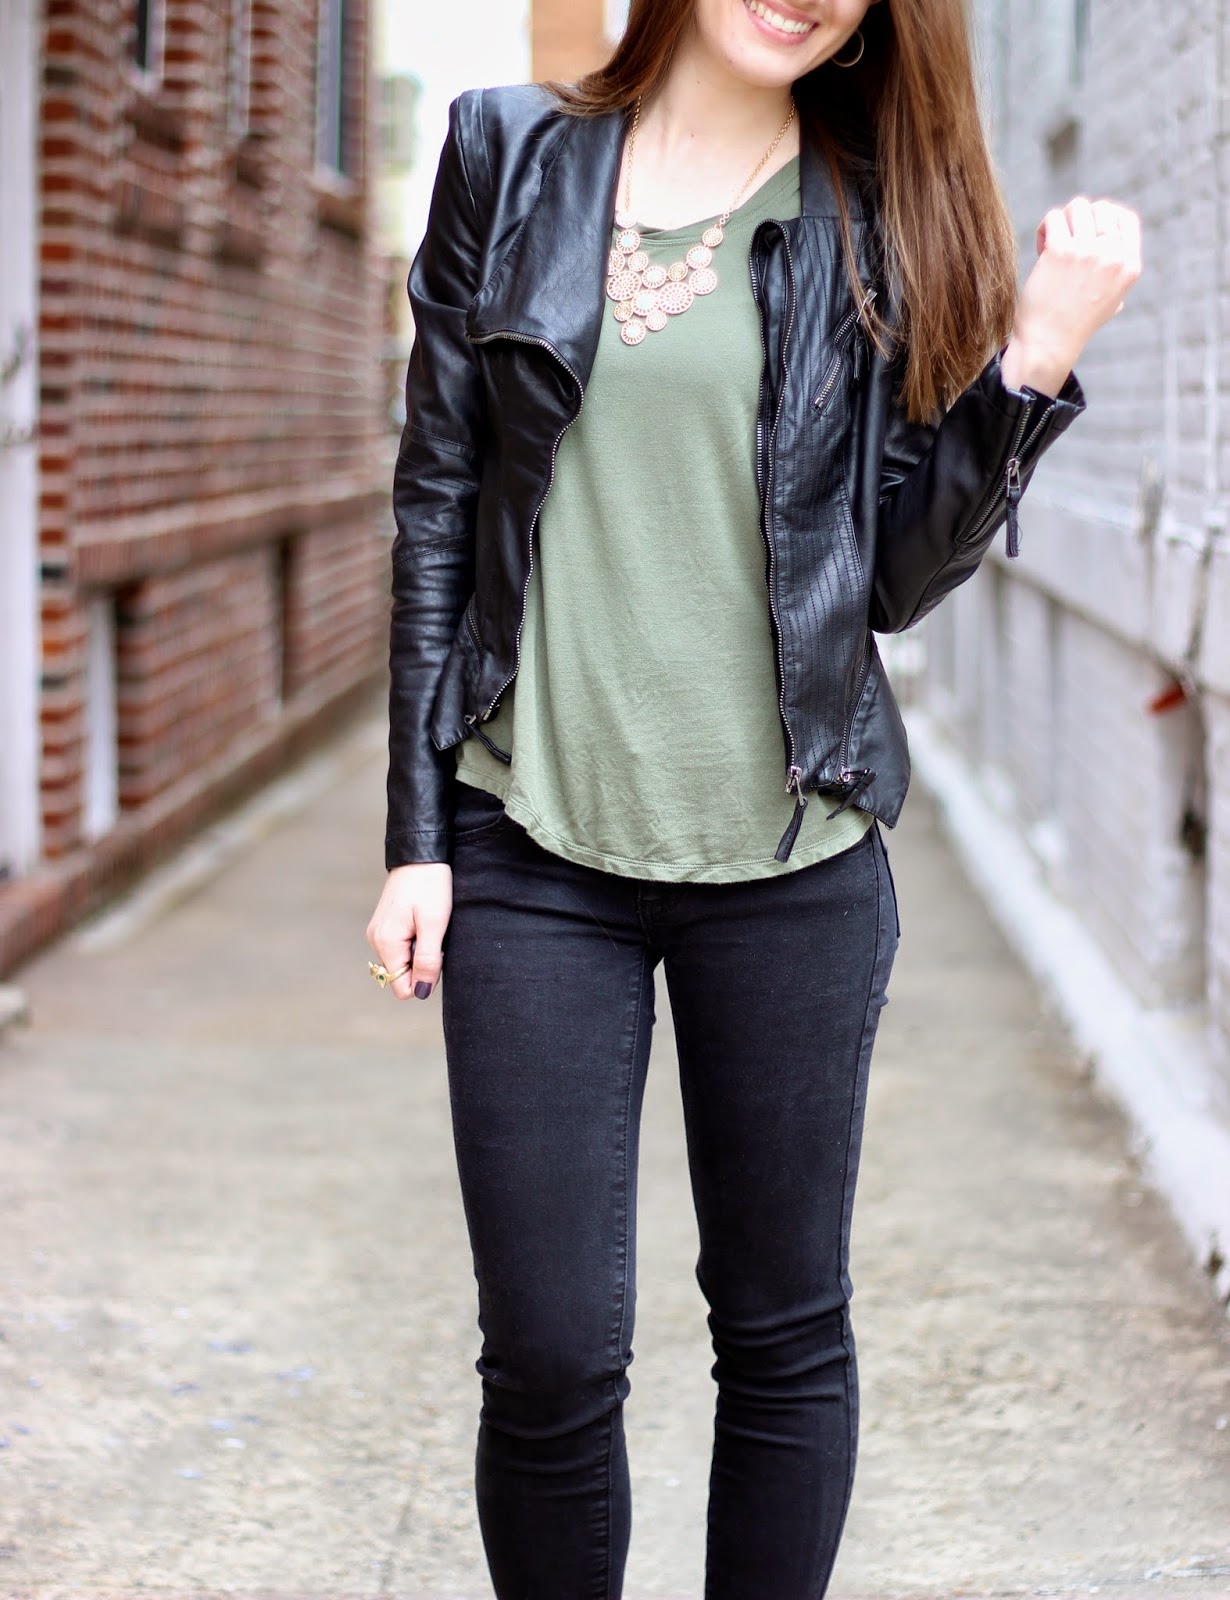 What to Wear: St. Pattie’s Style!